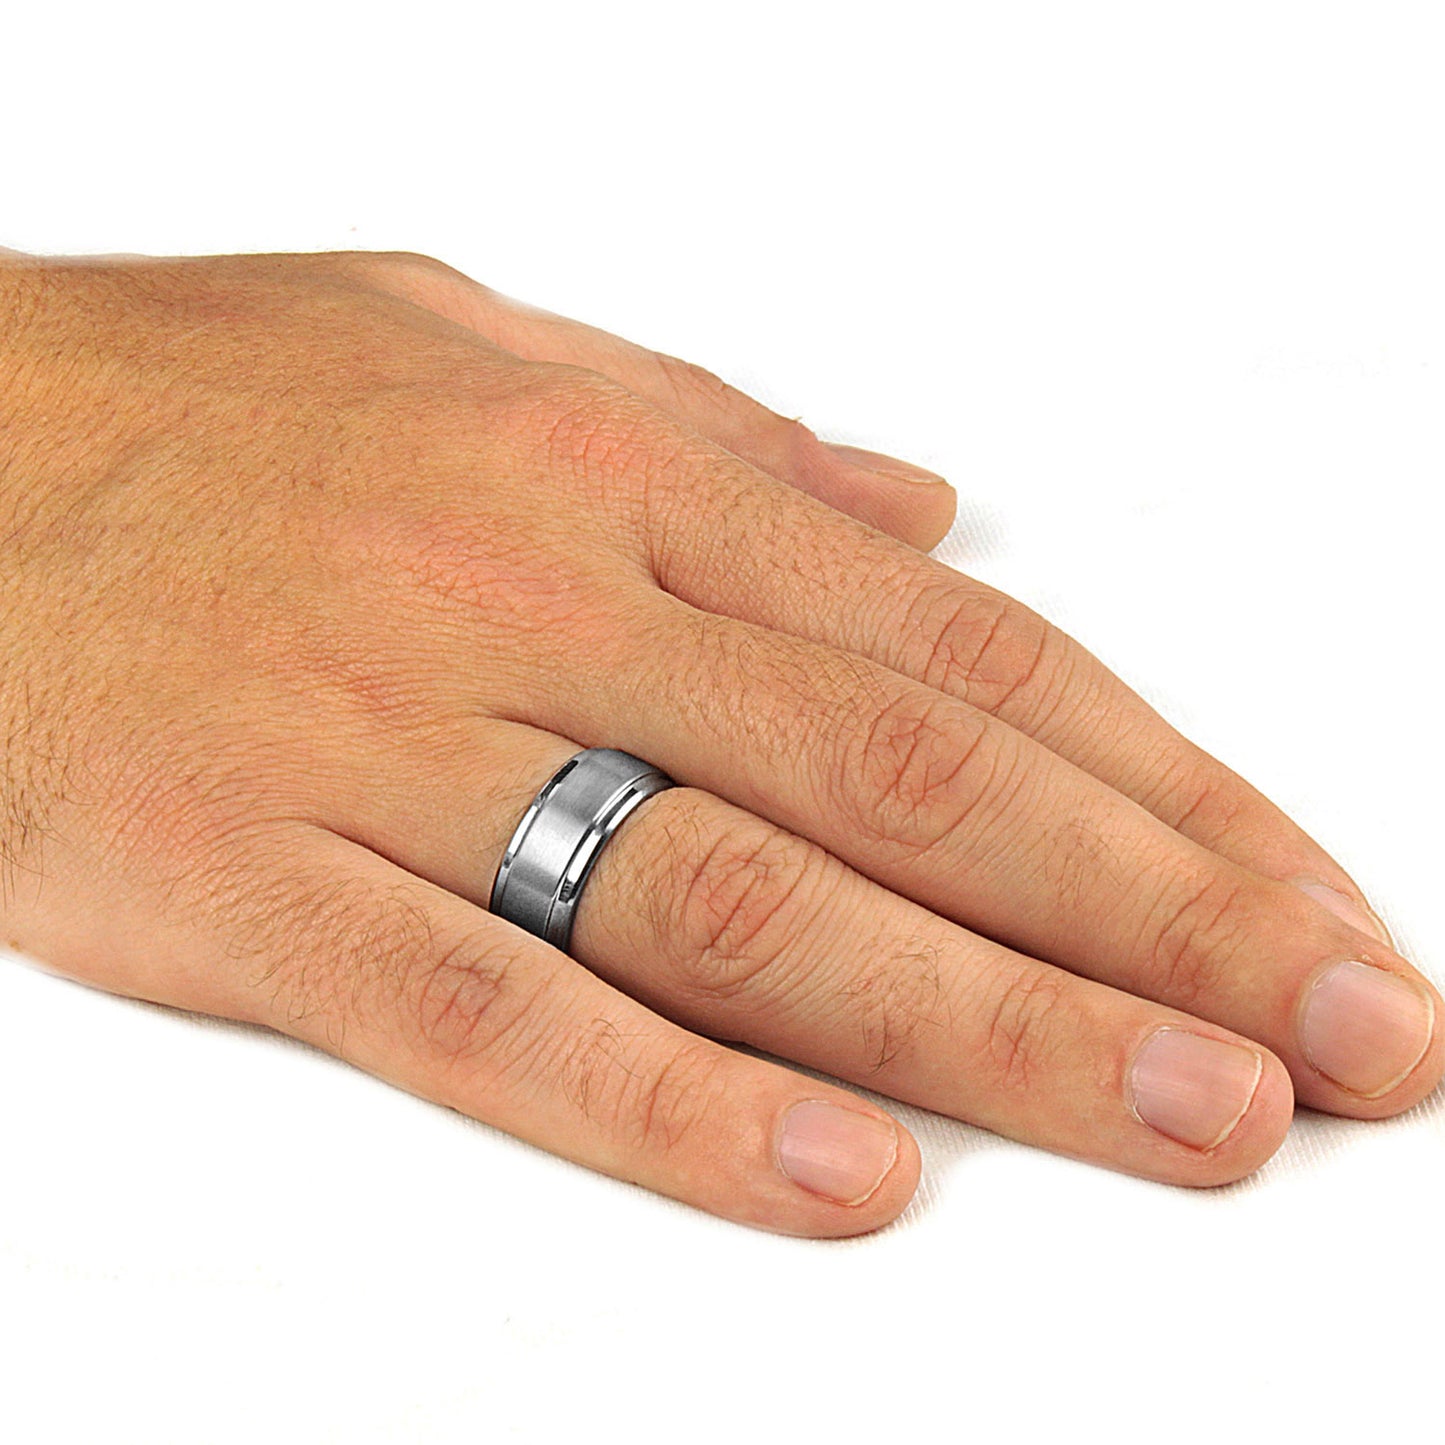 Brushed and Polished Ridged Edge Tungsten Carbide Ring (9mm Wide)